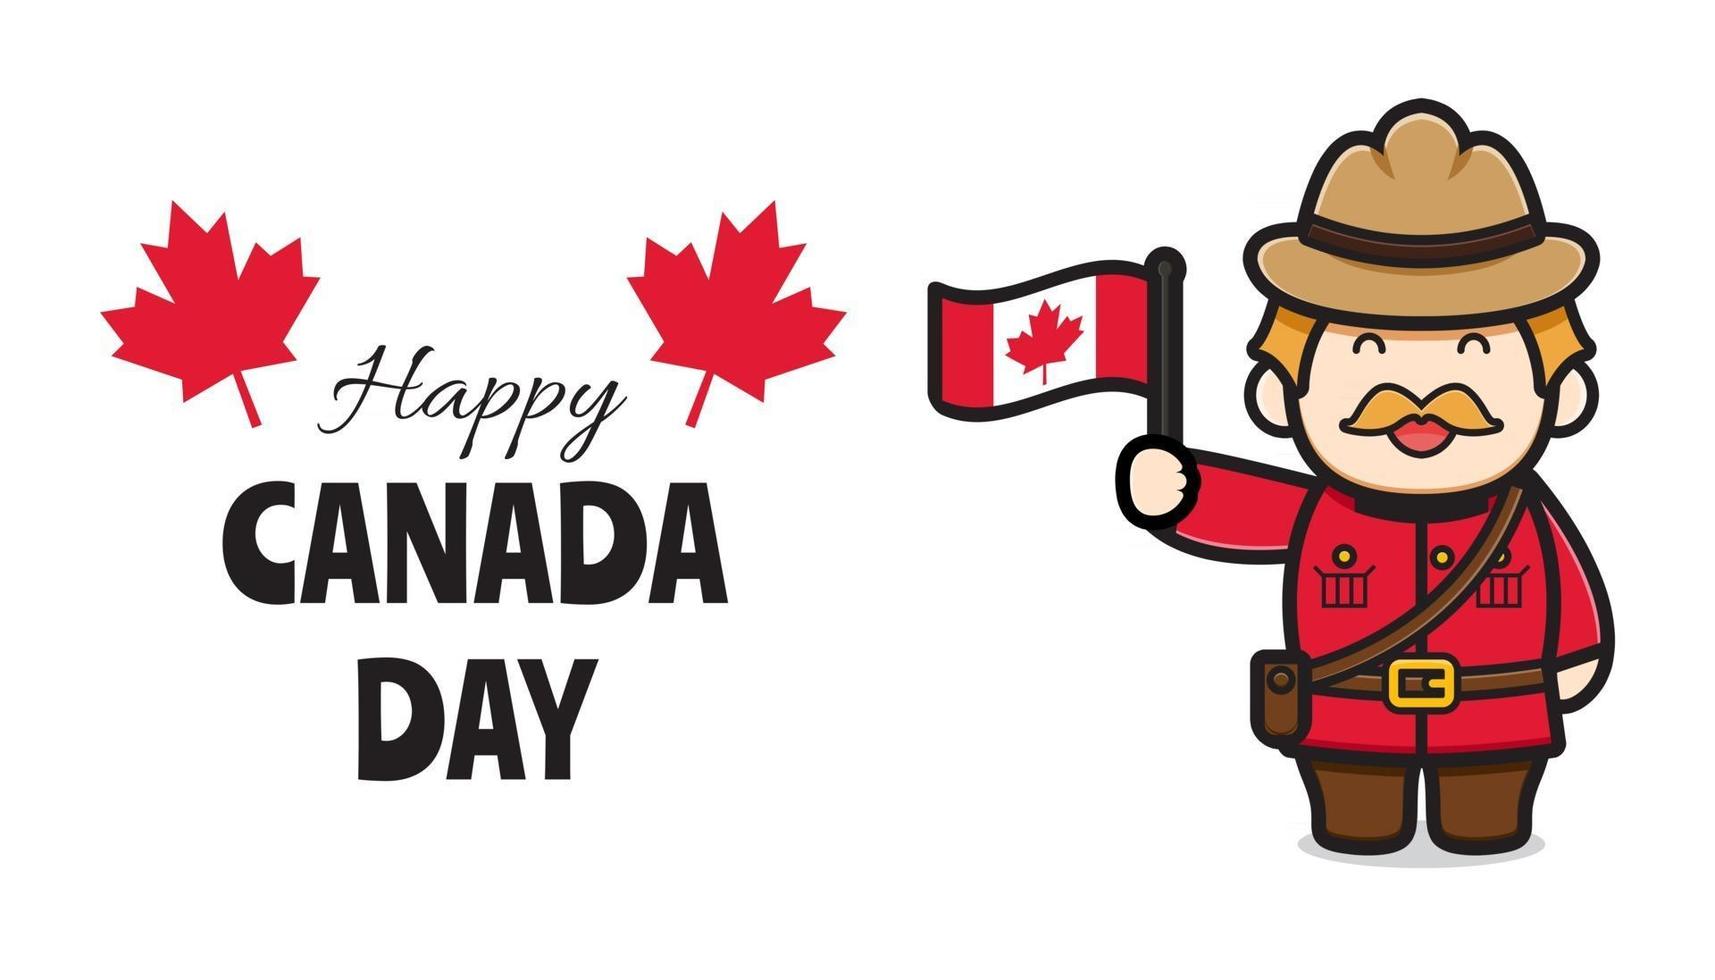 Cute oldman character celebrated Canada Day cartoon vector icon illustration